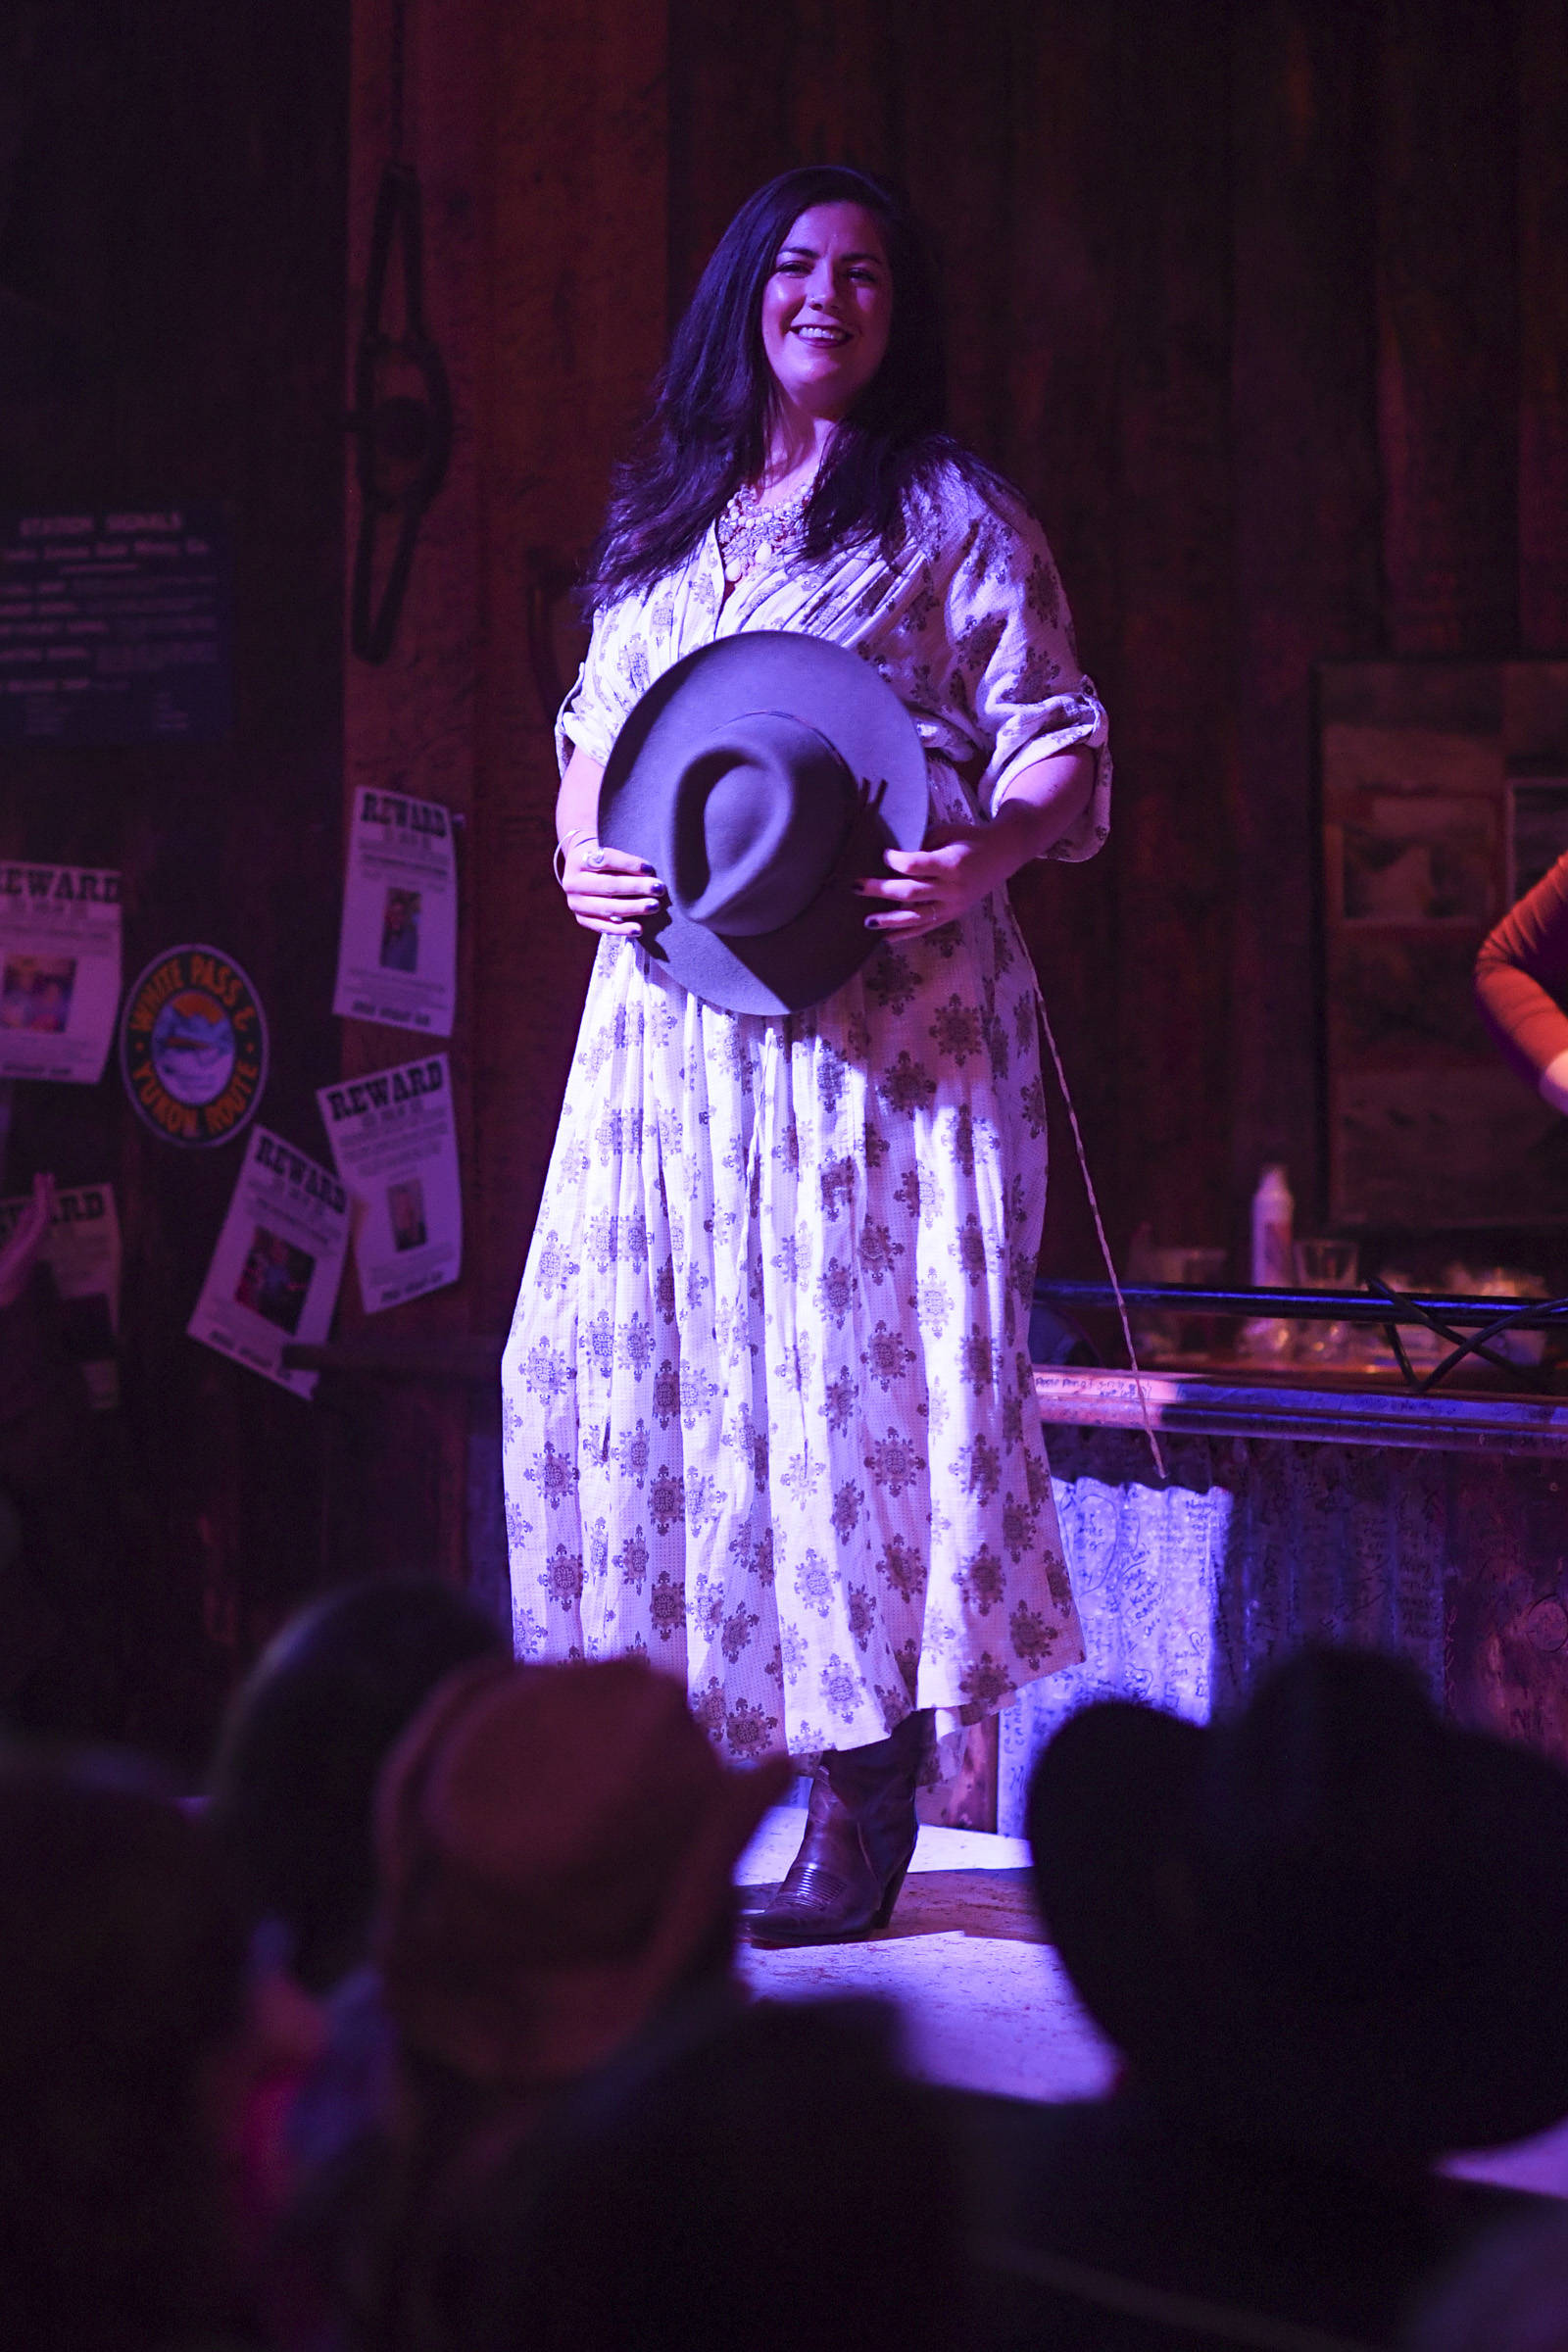 Men’s and women’s clothing from Downtown Dames Resale Shop is modeled on stage during the Juneau Rotaract’s Wild West Roundup Fashion Show at the Red Dog Saloon on Saturday, April 27, 2019. (Michael Penn | Juneau Empire)